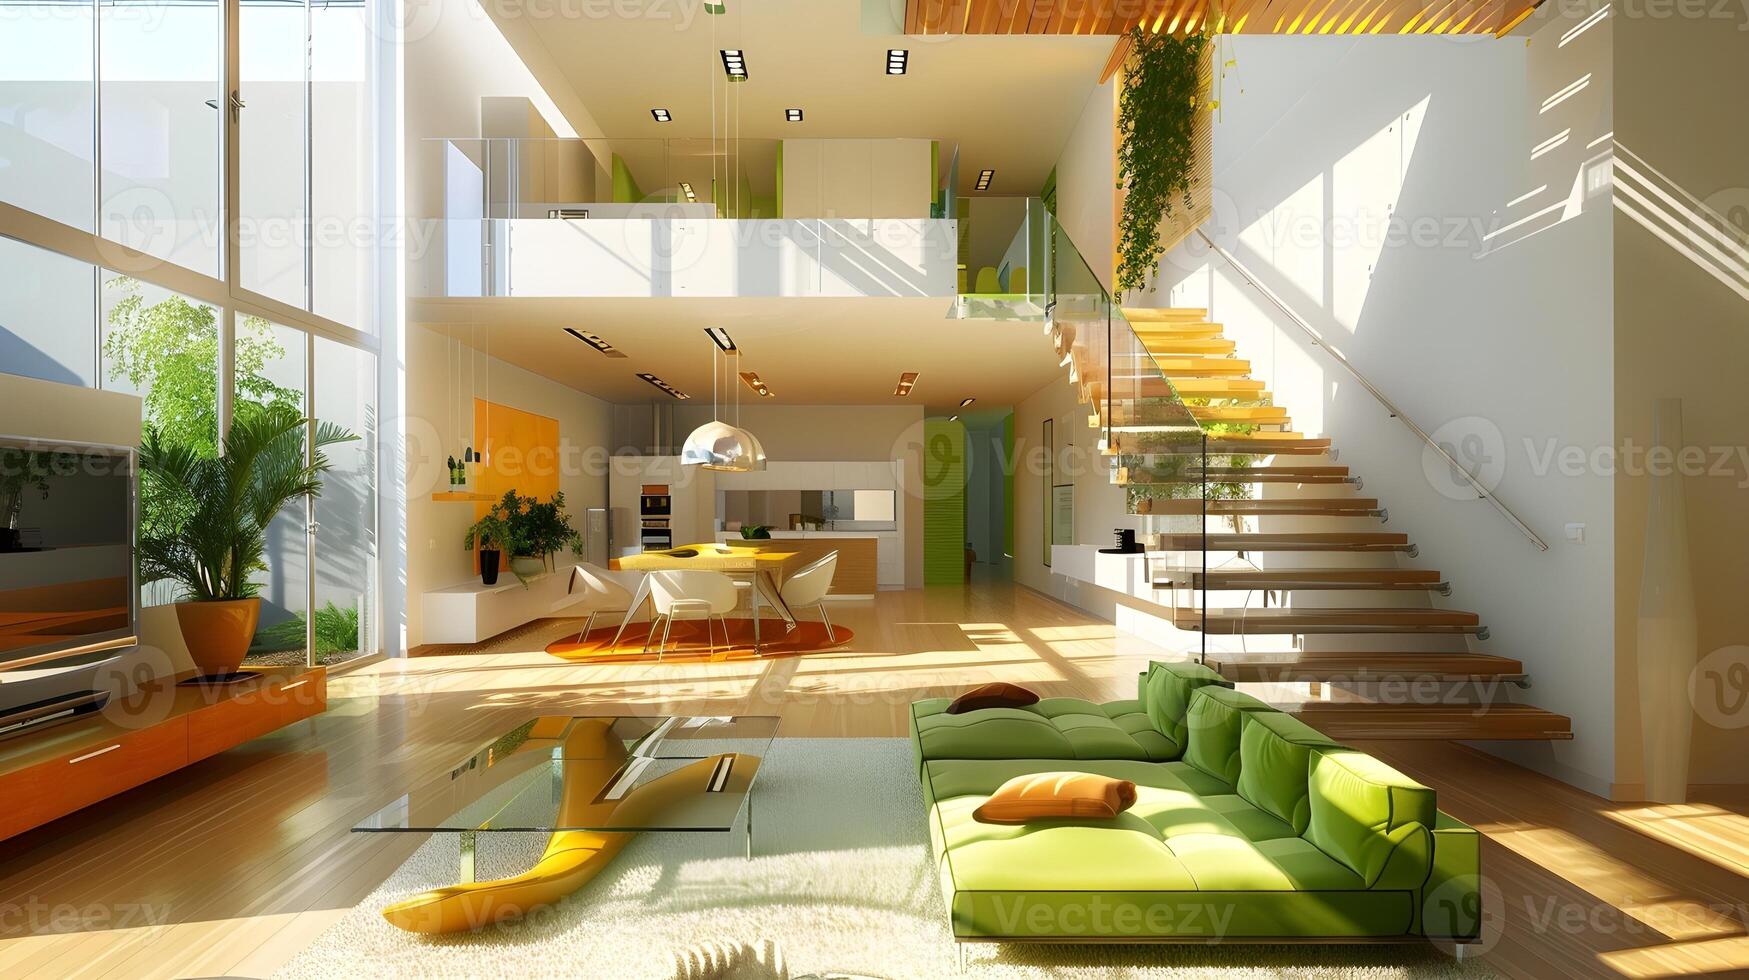 Lively Modern Home Interior with Green Sofa and Pear Wood Staircase in Bright Sunlit Space photo